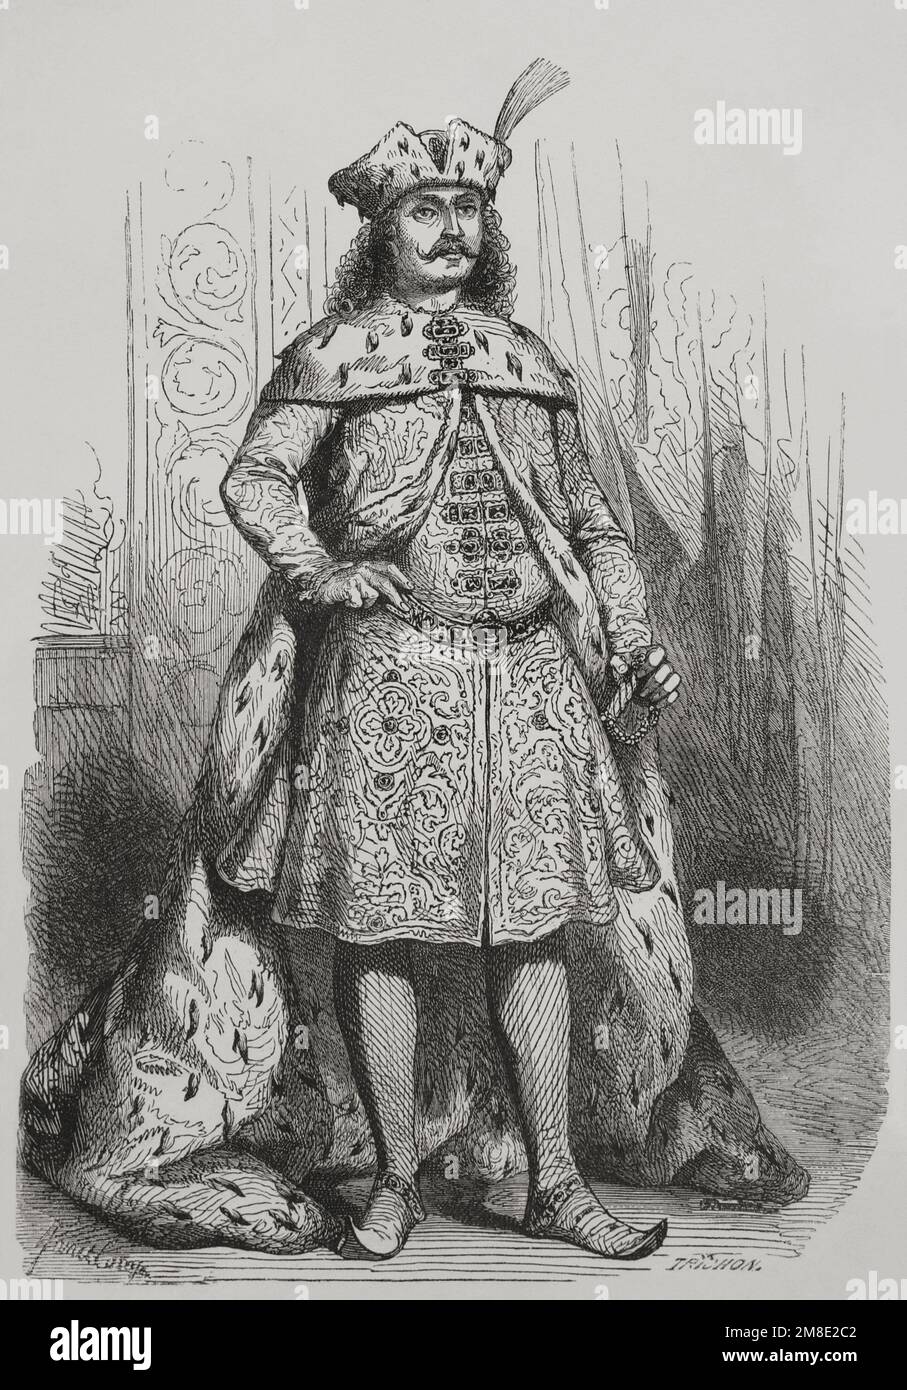 Prince Francis II Rákóczi (1676-1735). Leader of Rákóczi's War of Independence against the Habsburgs in 17031711, as the Prince of the Estates Confederated for Liberty of the Kingdom of Hungary. Portrait. Engraving by Janet Lange and Trichon. 'Los Heroes y las Grandezas de la Tierra' (The Heroes and the Grandeurs of the Earth). Volume VI. 1856. Author: Auguste Trichon (1814-1898). French engraver. Janet-Lange (pseudonym of Ange-Louis Janet 1815-1872). French artist. Stock Photo